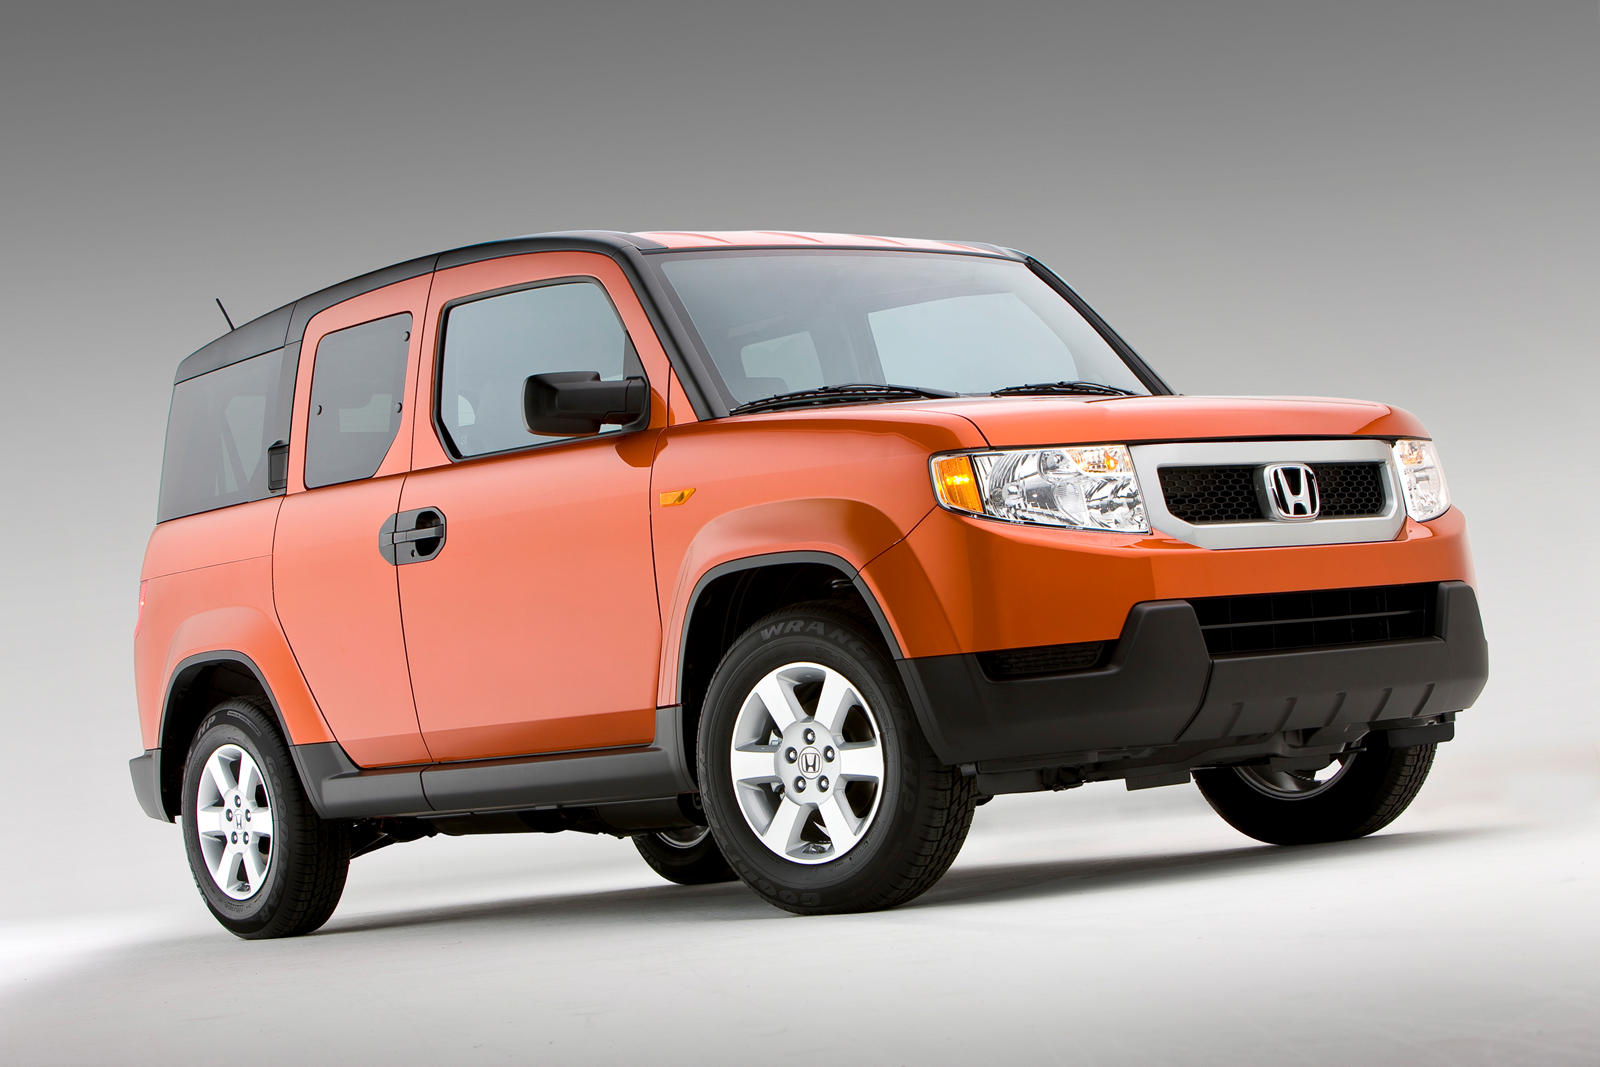 Used Honda Element Orange For Sale Near Me: Check Photos And Prices